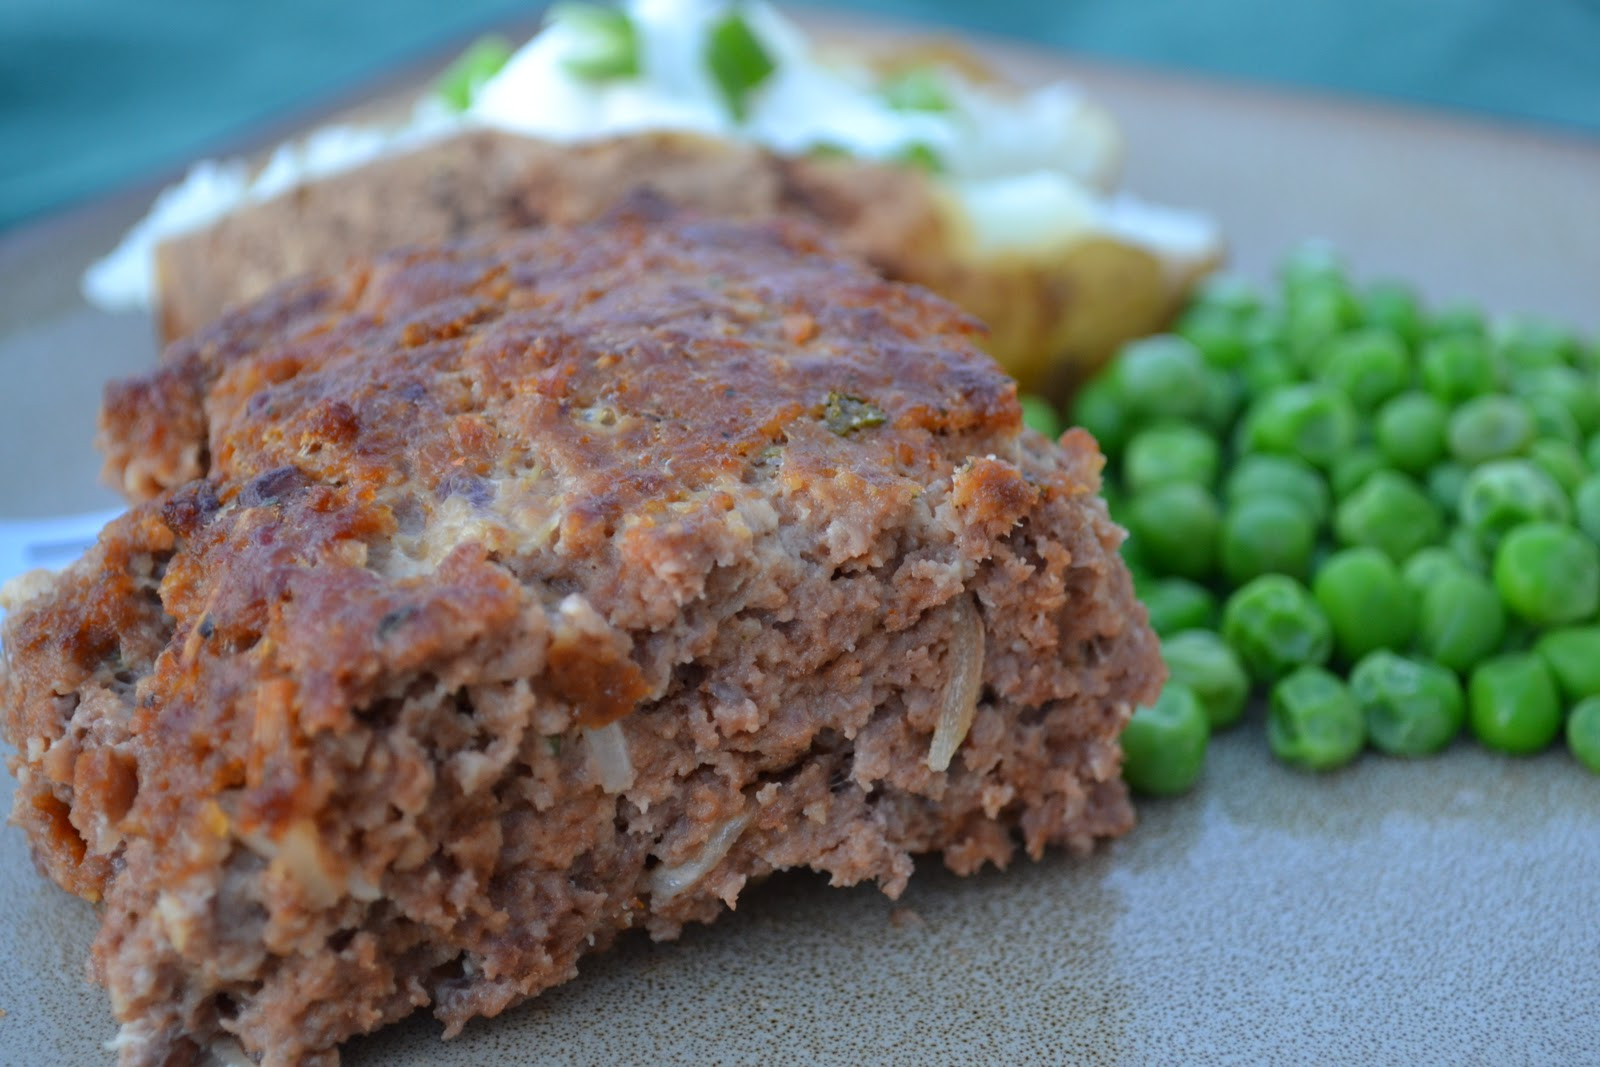 Lipton Onion Soup Meatloaf Recipe
 The Classy Kitchen Meatloaf